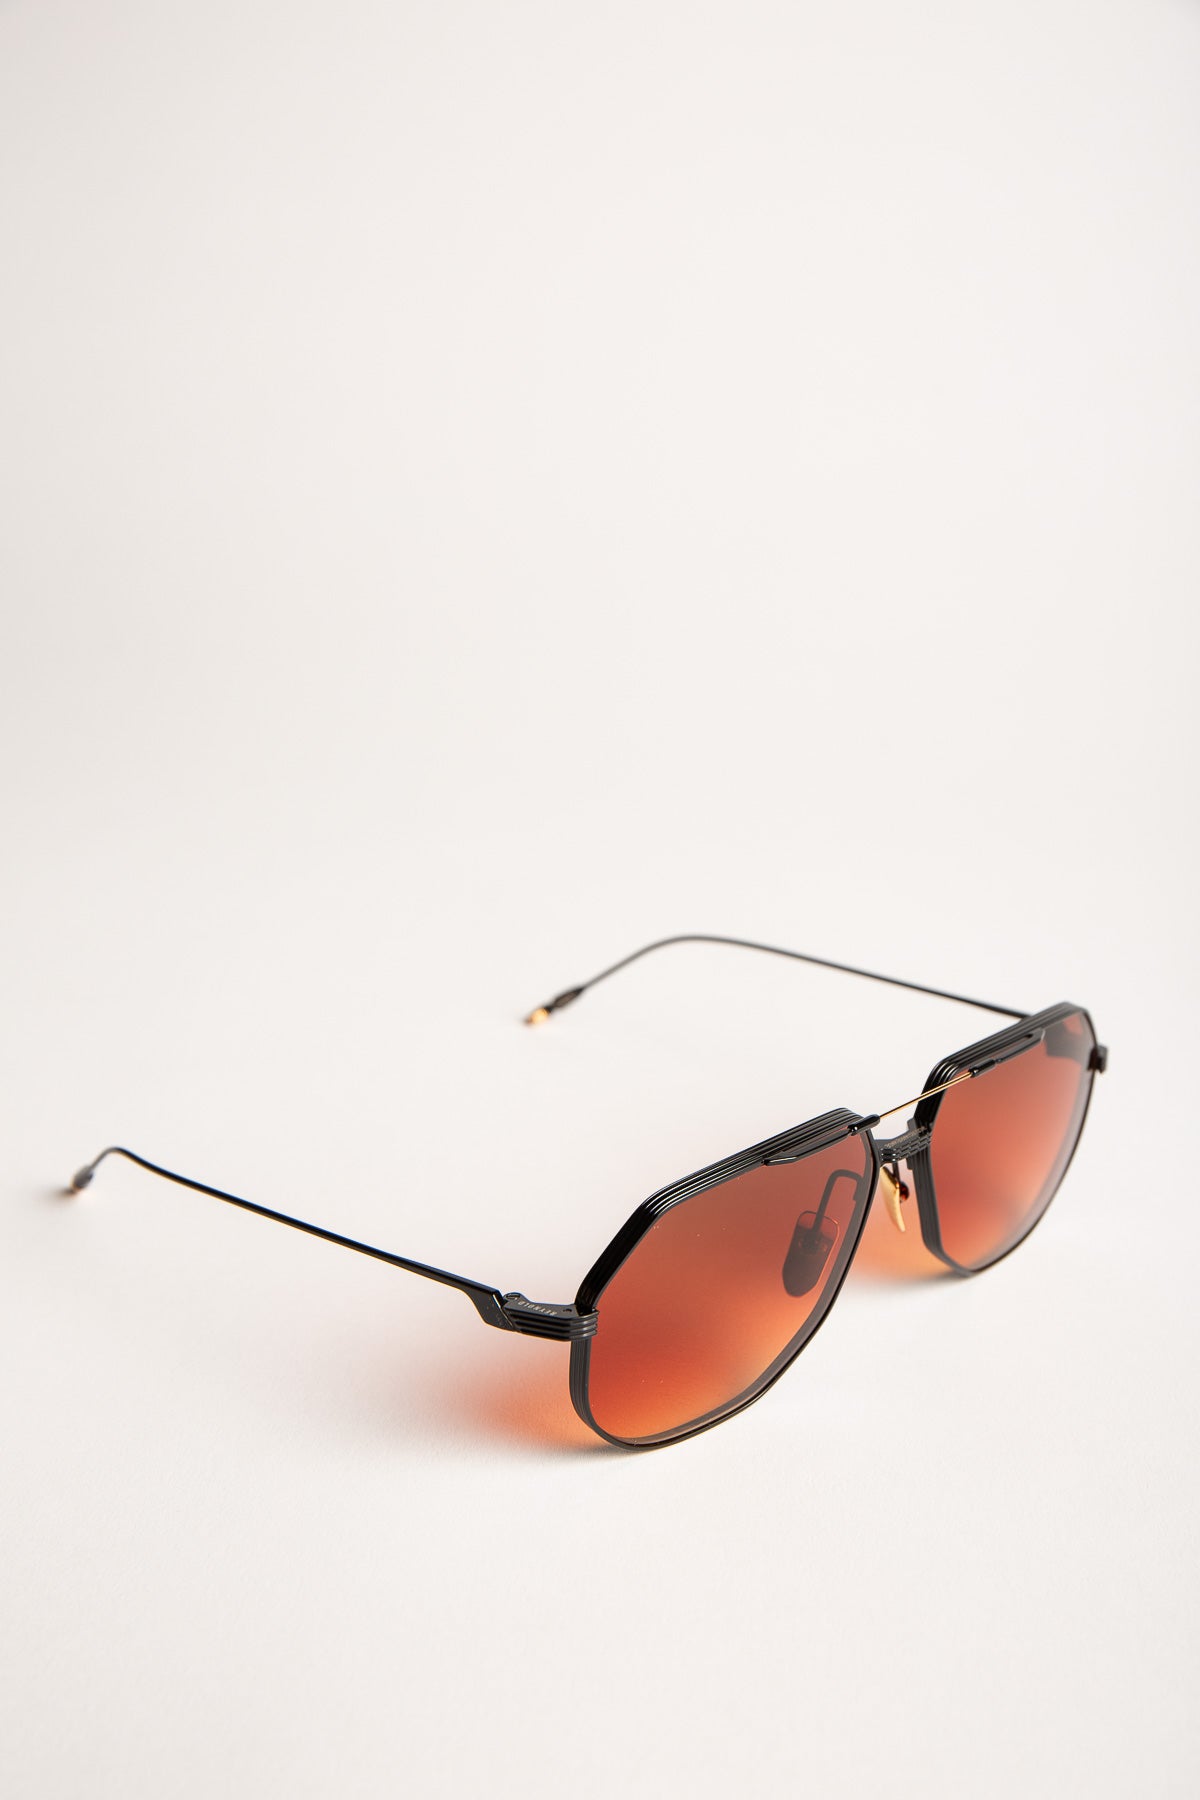 JACQUES MARIE MAGE | REYNOLD SUNGLASSES